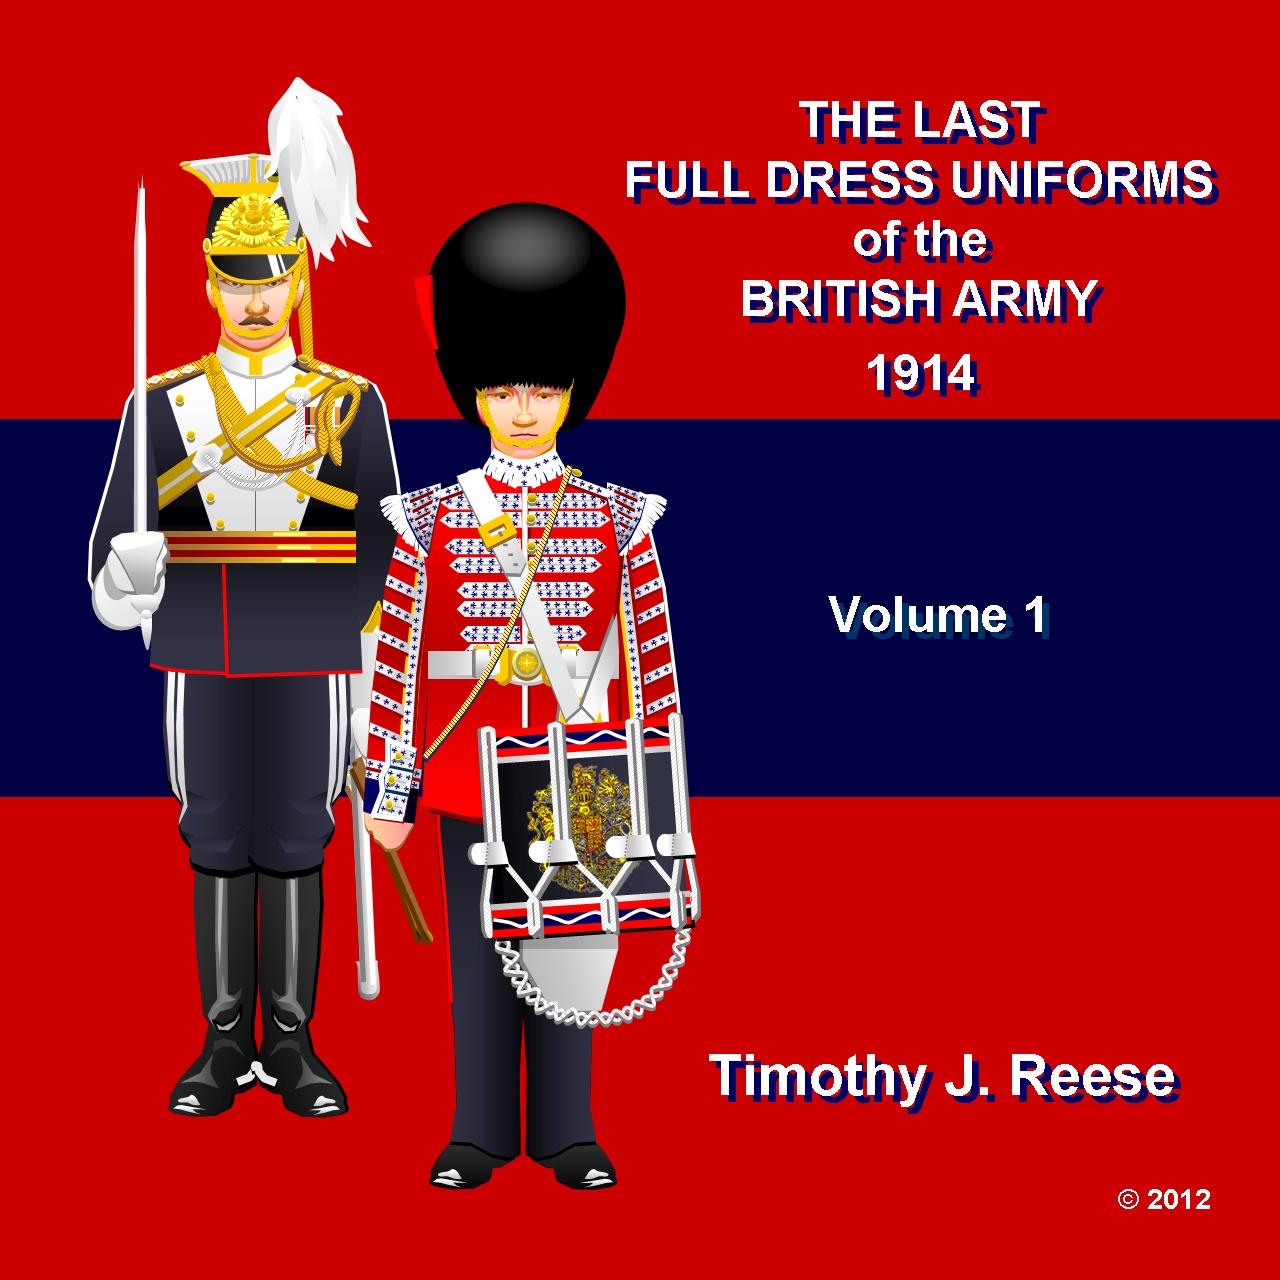 SAMPLE PLATE: The Last Full Dress Uniforms of the British Army, 1914, Volume 1